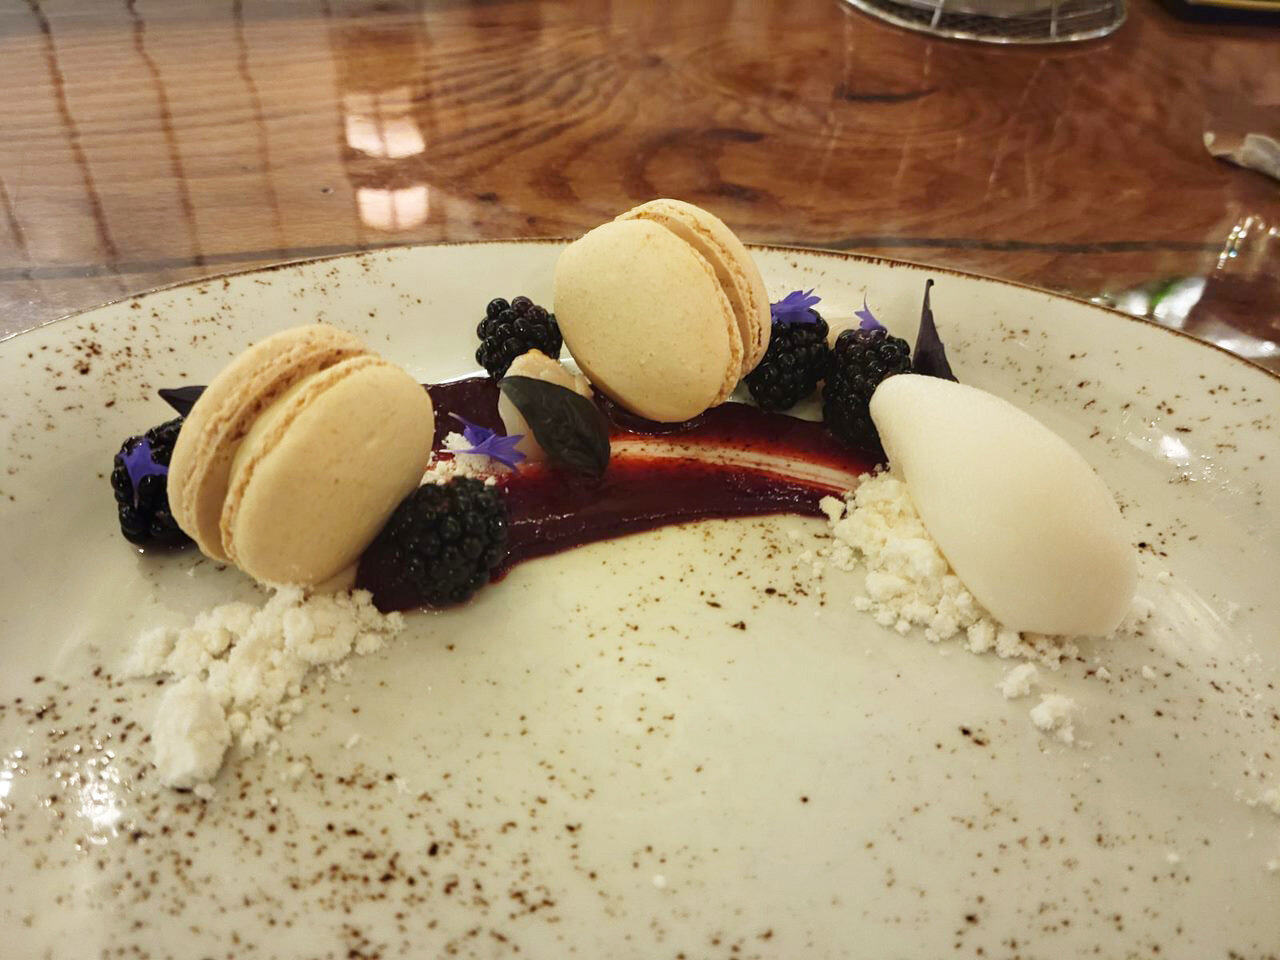 Dune’s macarons are served with fresh blackberries from Nantucket’s Eat Fire Farm, lychee sorbet and white chocolate “snow.”